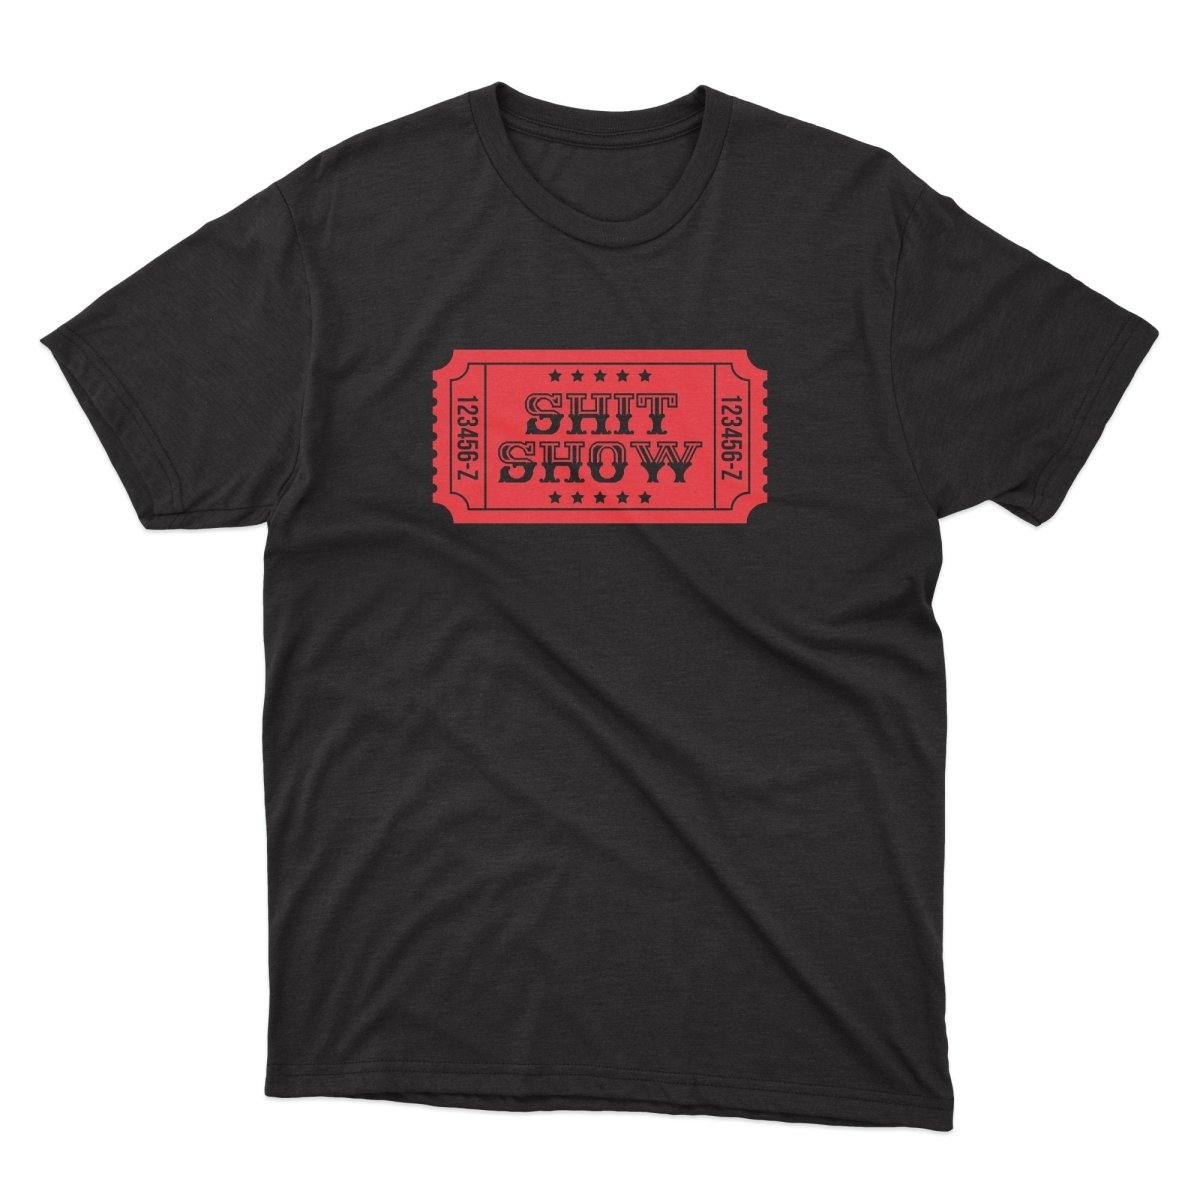 Ticket To The Shit Show Shirt - stickerbullTicket To The Shit Show ShirtShirtsPrintifystickerbull10324587166443817329BlackSa black t - shirt with a red ticket that says shit show